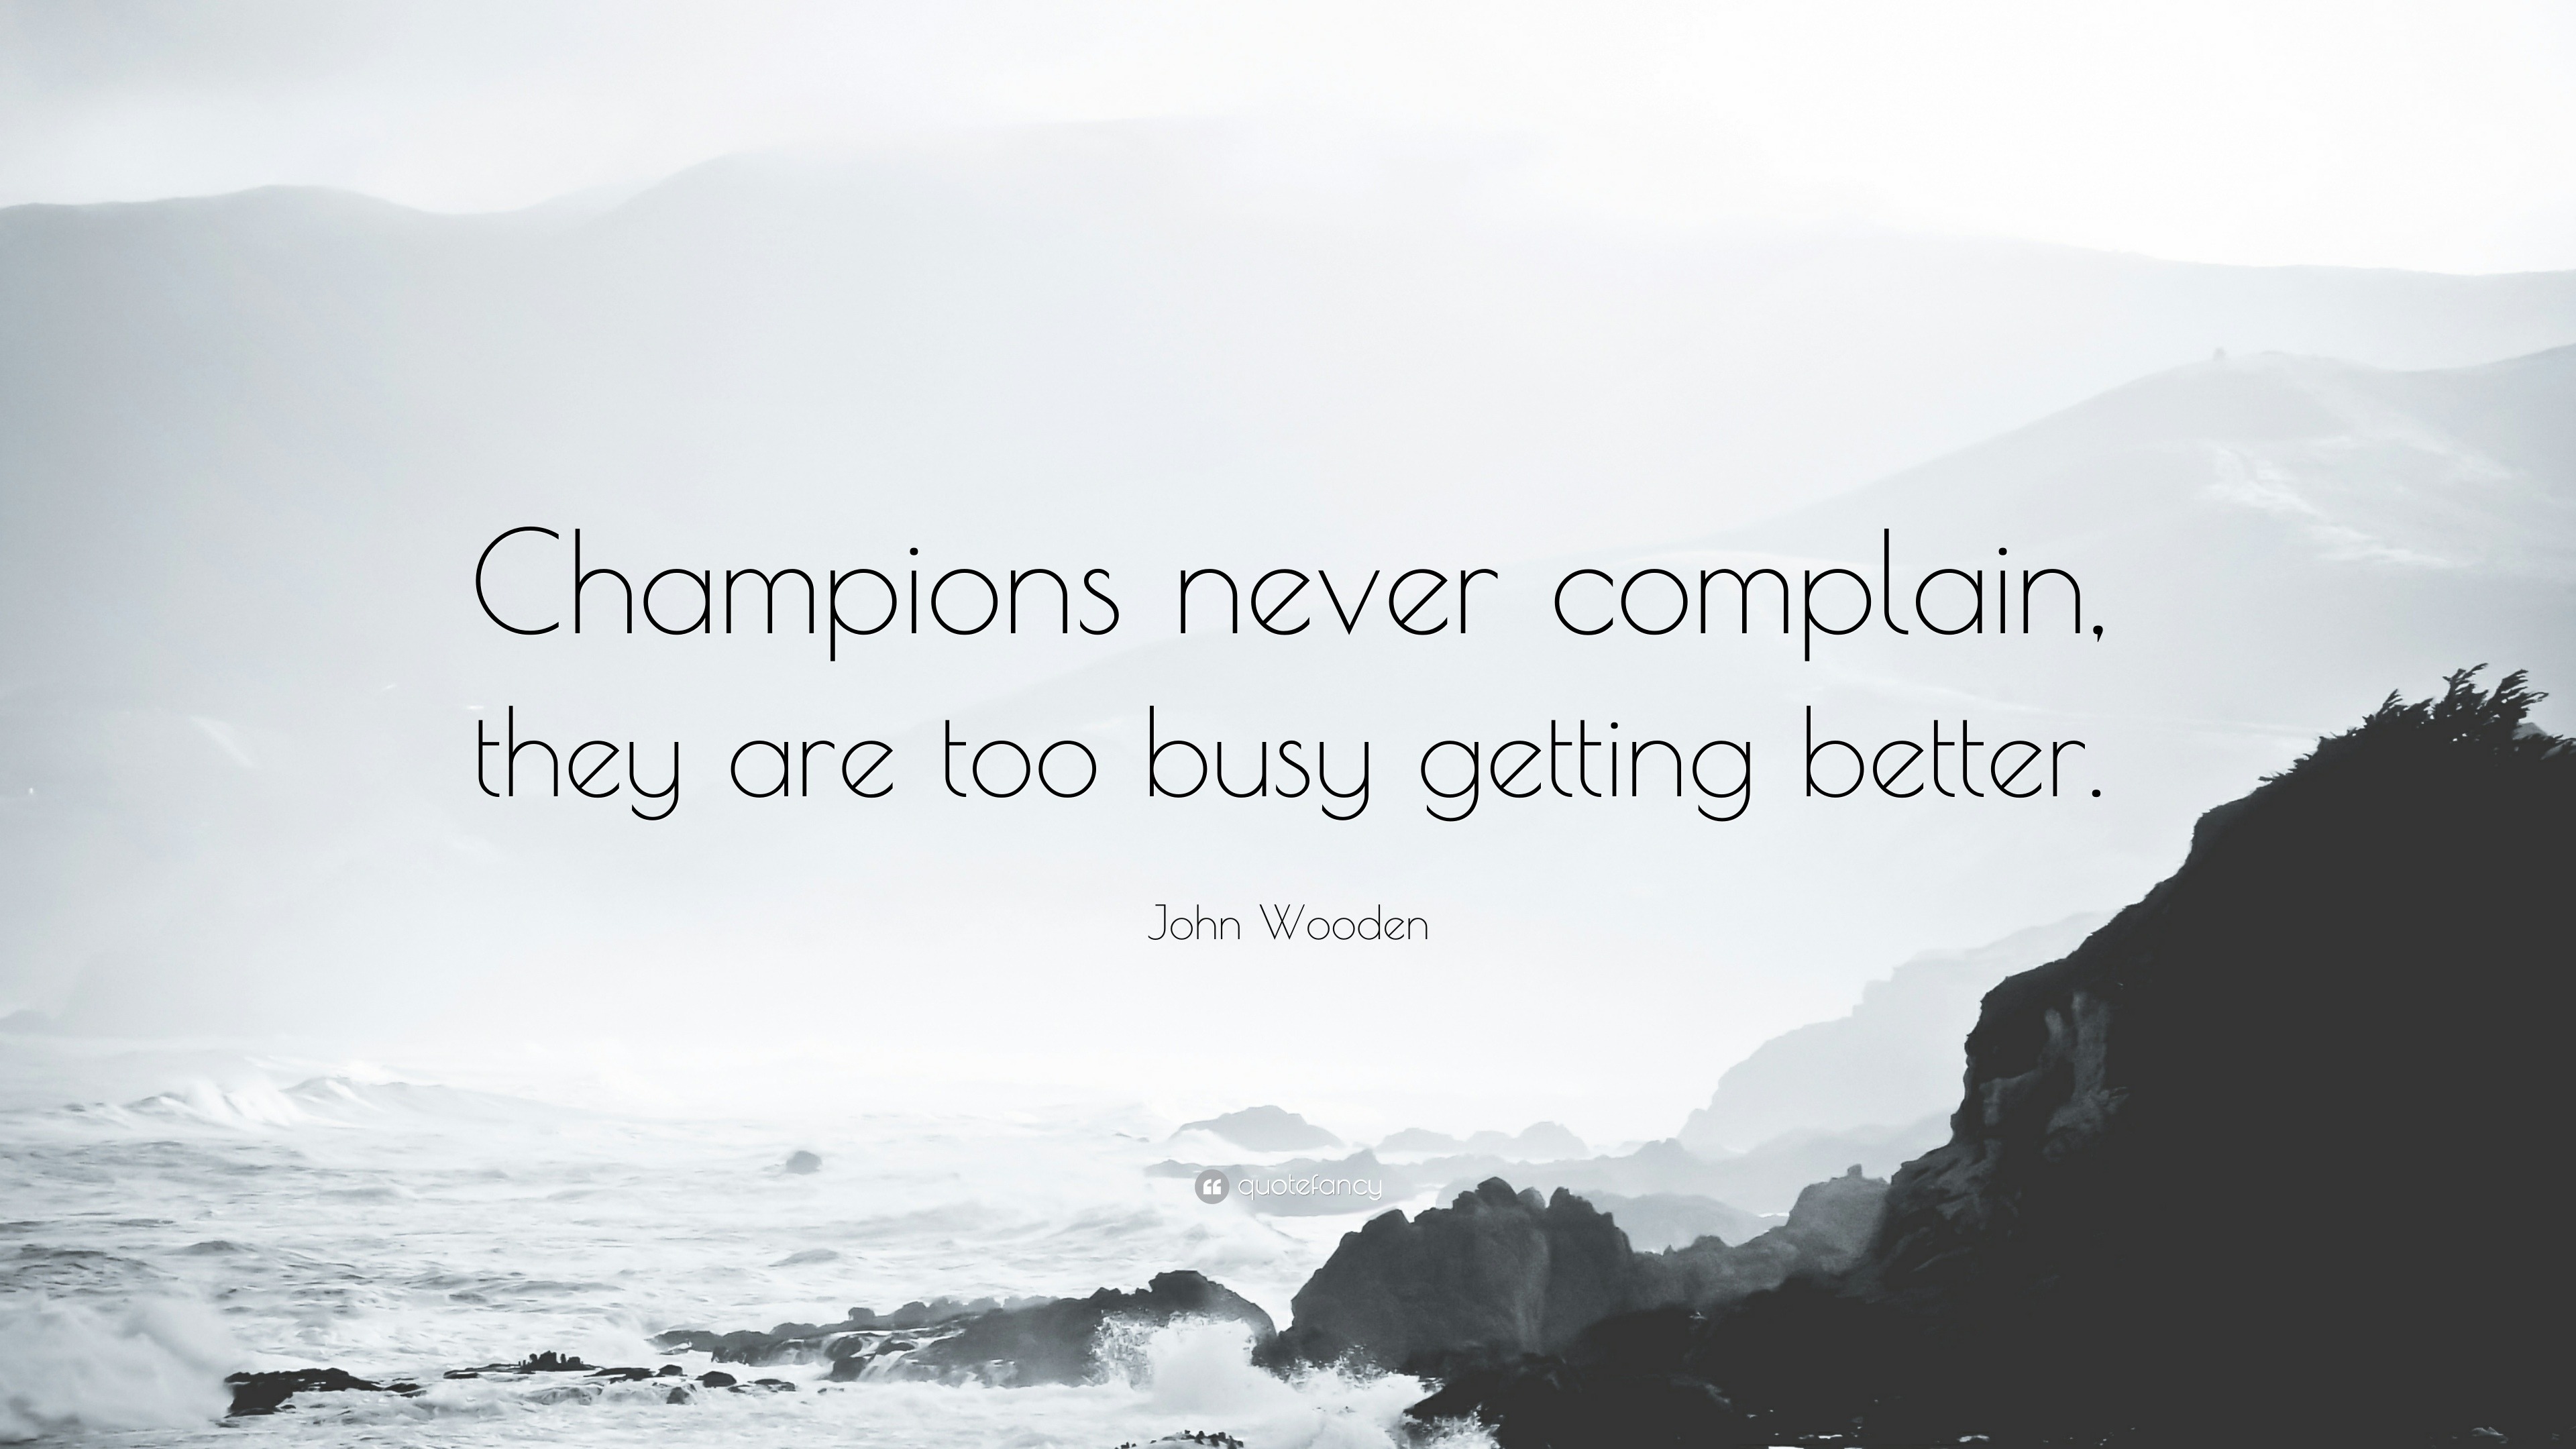 406697 John Wooden Quote Champions never complain they are too busy